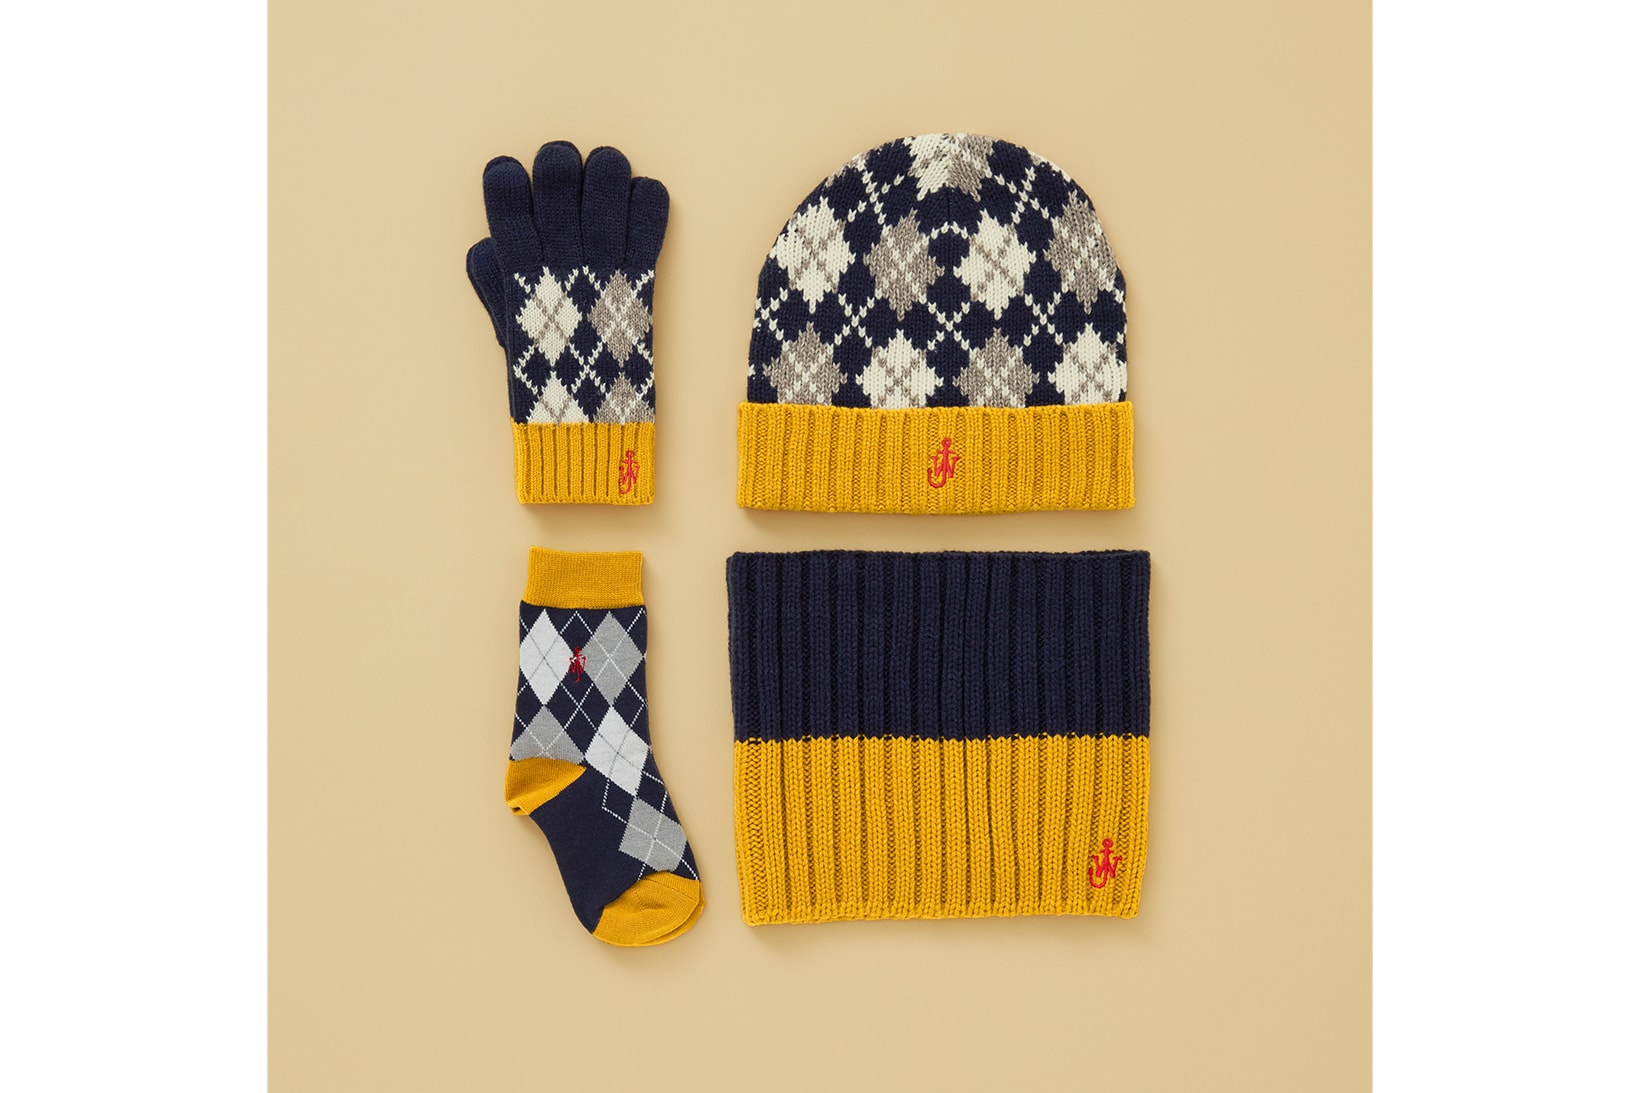 uniqlo jw anderson holiday collaboration accessories beanies gloves scarves socks